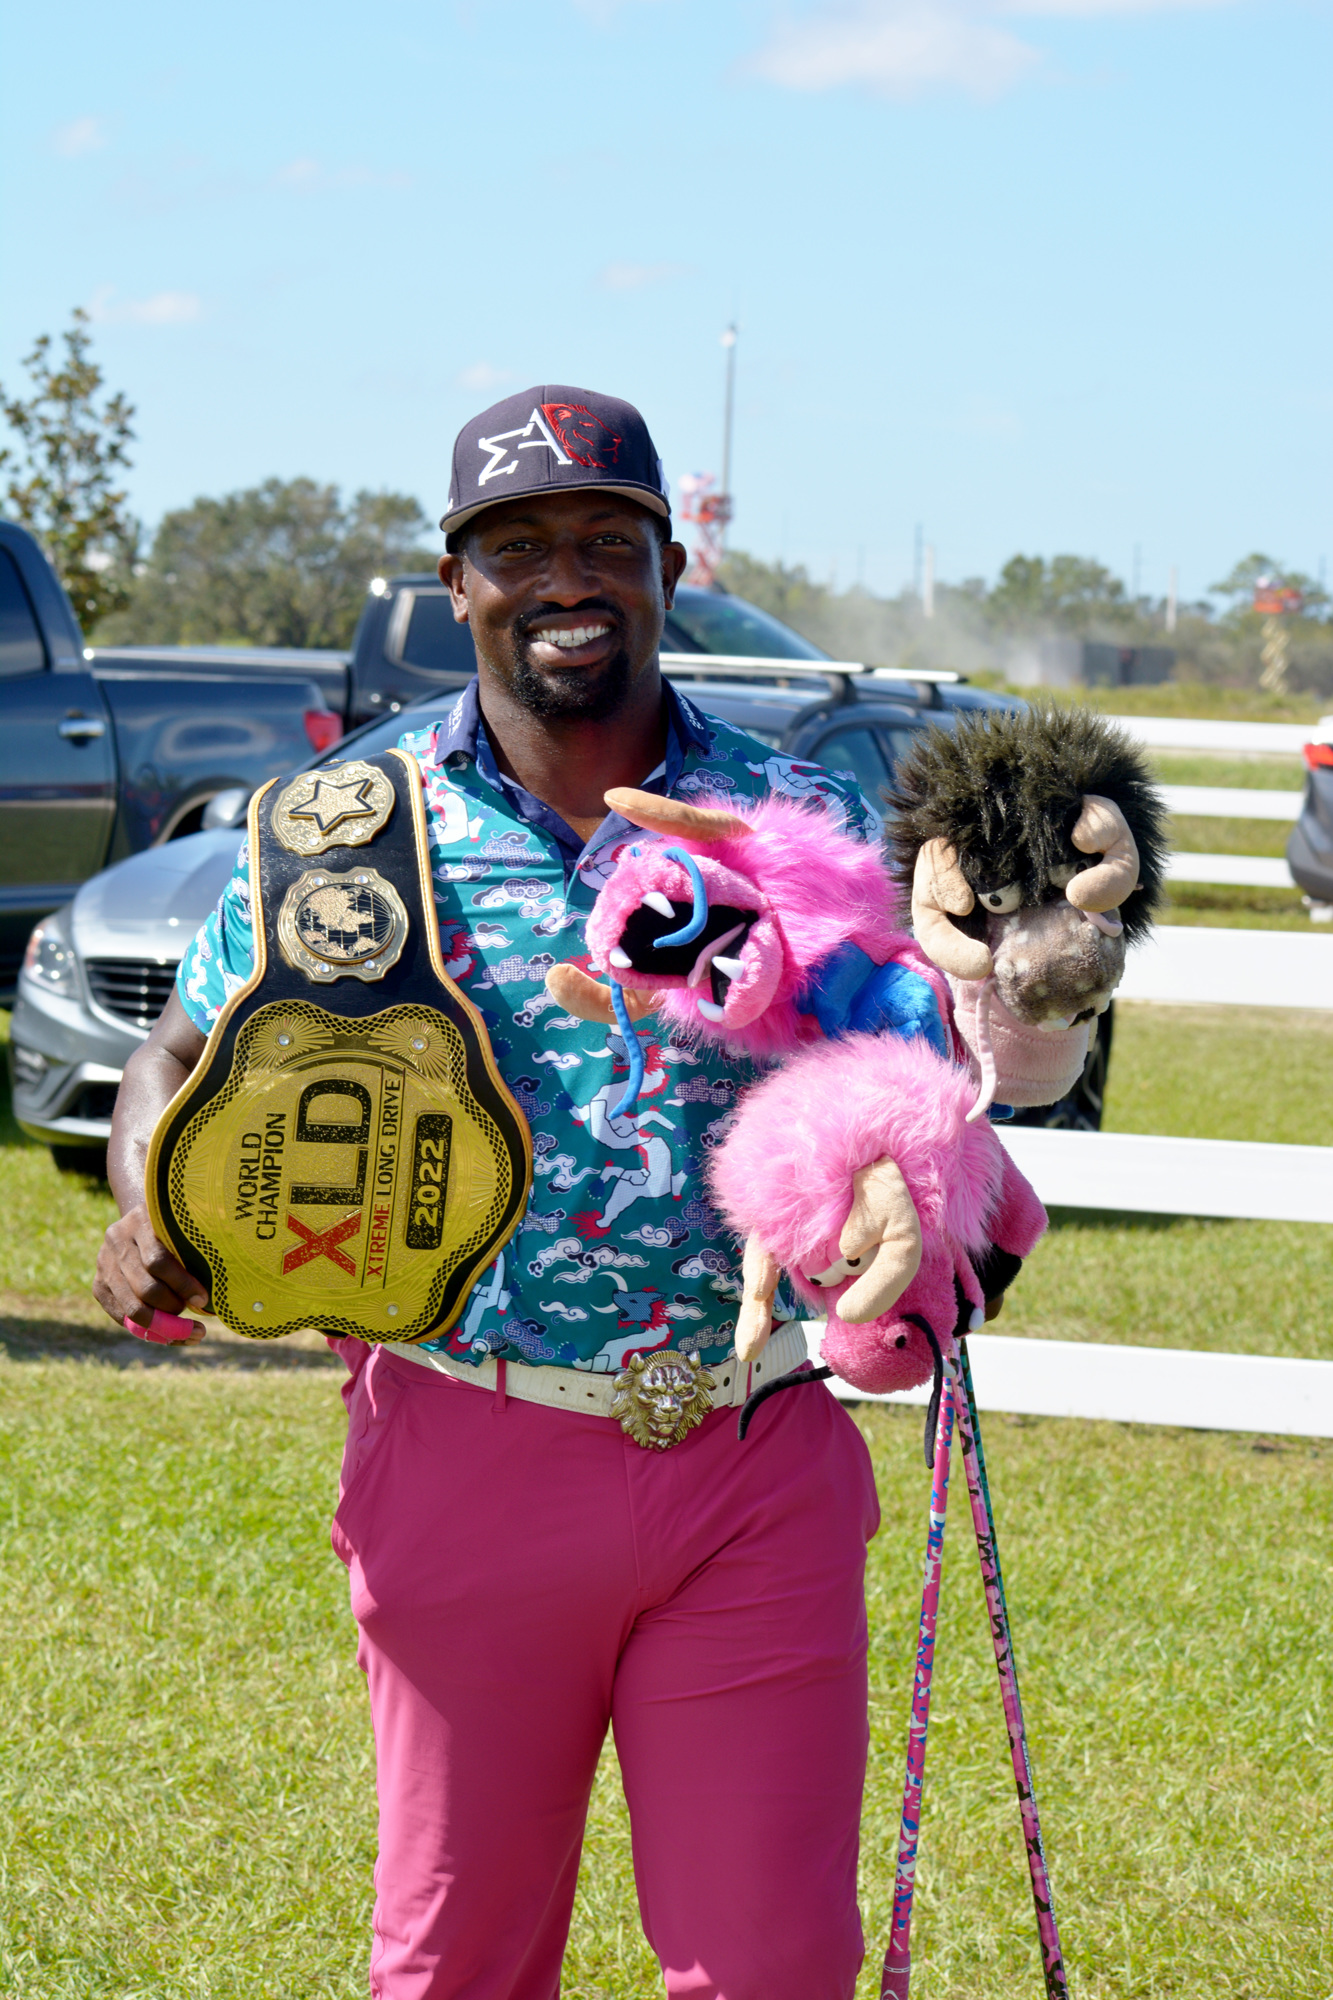 Maurice Allen won the XLD 40 division of the ULD Championships with a 344.3 yard drive. Allen has twice been ranked No. 1 by the World Long Drive Association.  (Photo by Ryan Kohn.)